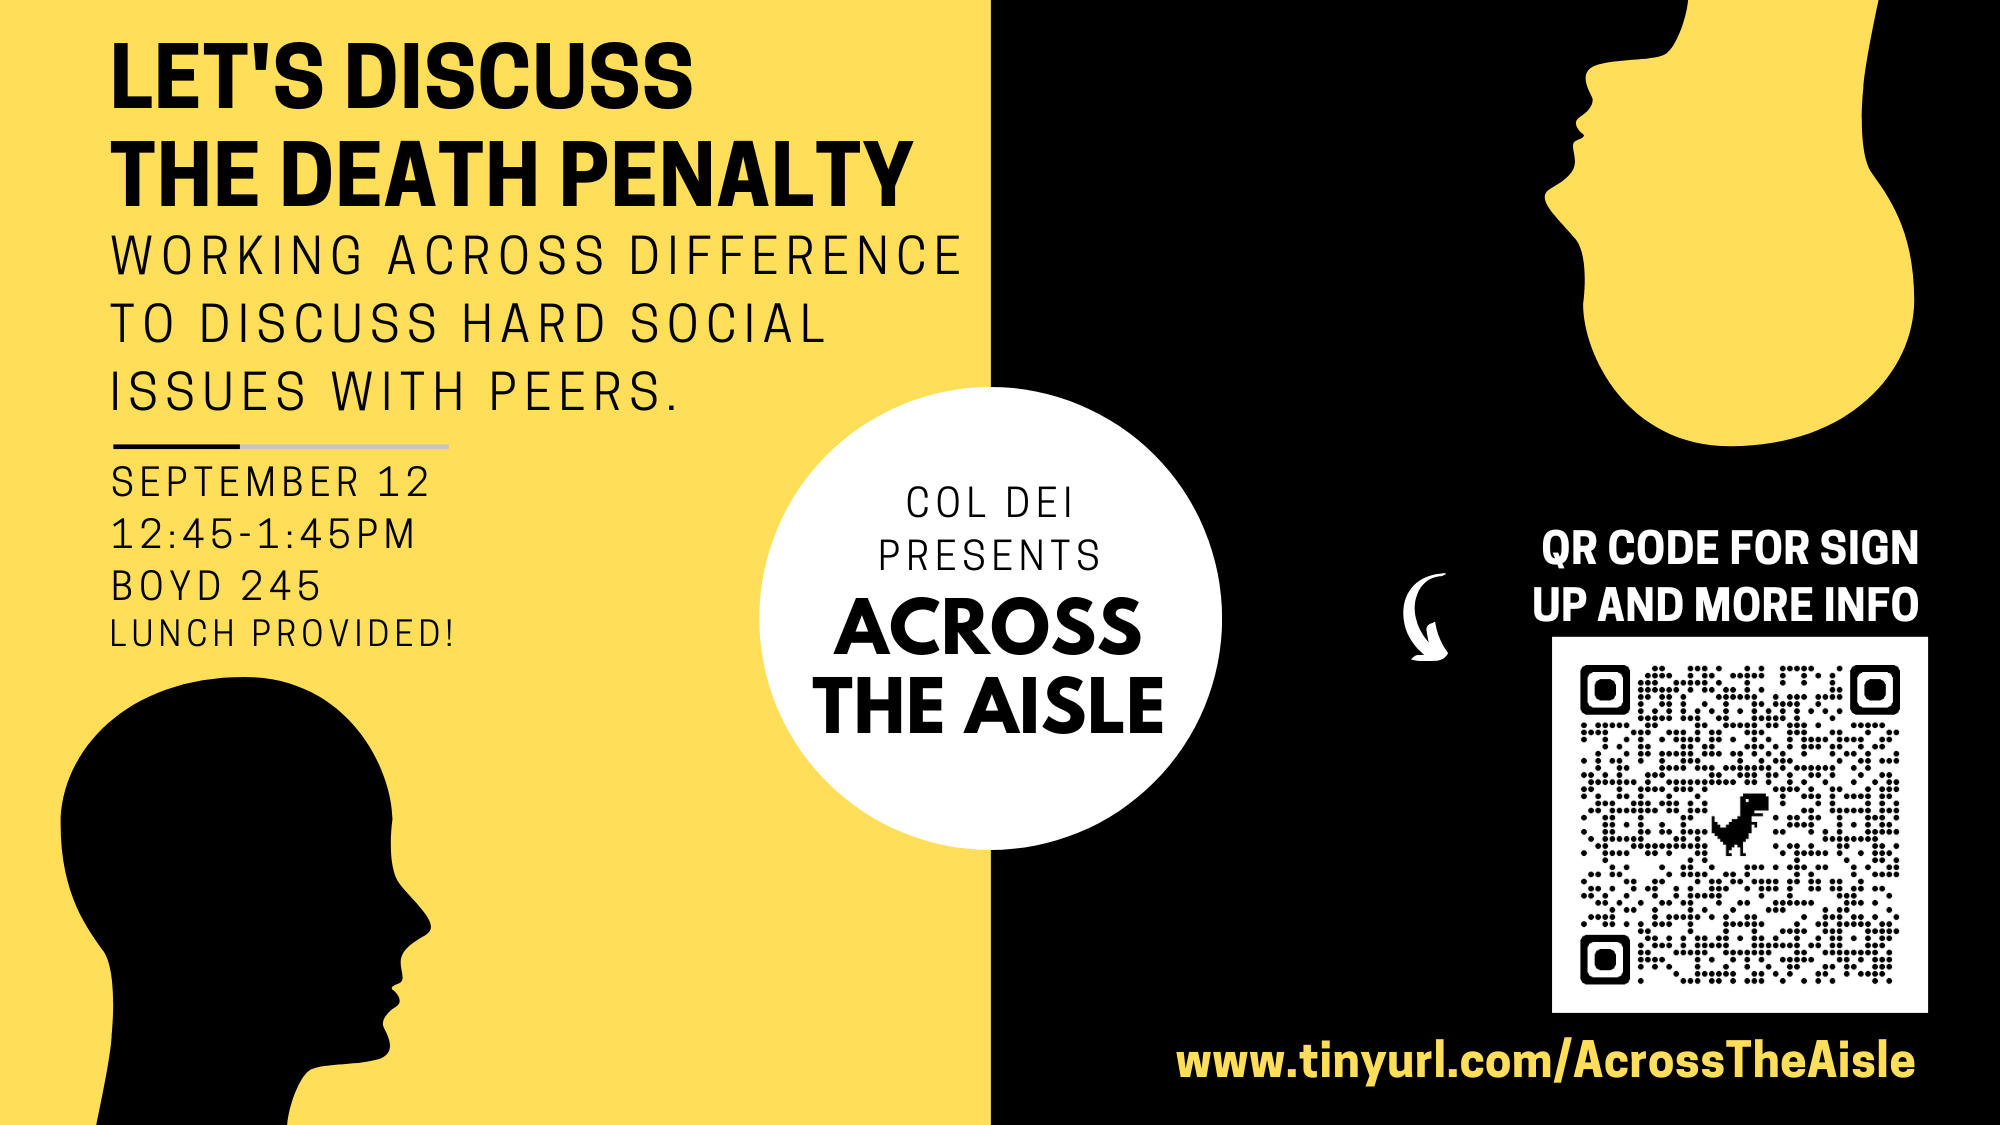 COL DEI PRESENTS: Across the Aisle        Let's Discuss the Death Penalty        Working across difference to discuss hard social issues with peers.        September 12    12:45-1:45PM    BOYD 245    Lunch Provided!        www. tinyurl.com/AcrossTheAisle for sign up and more information